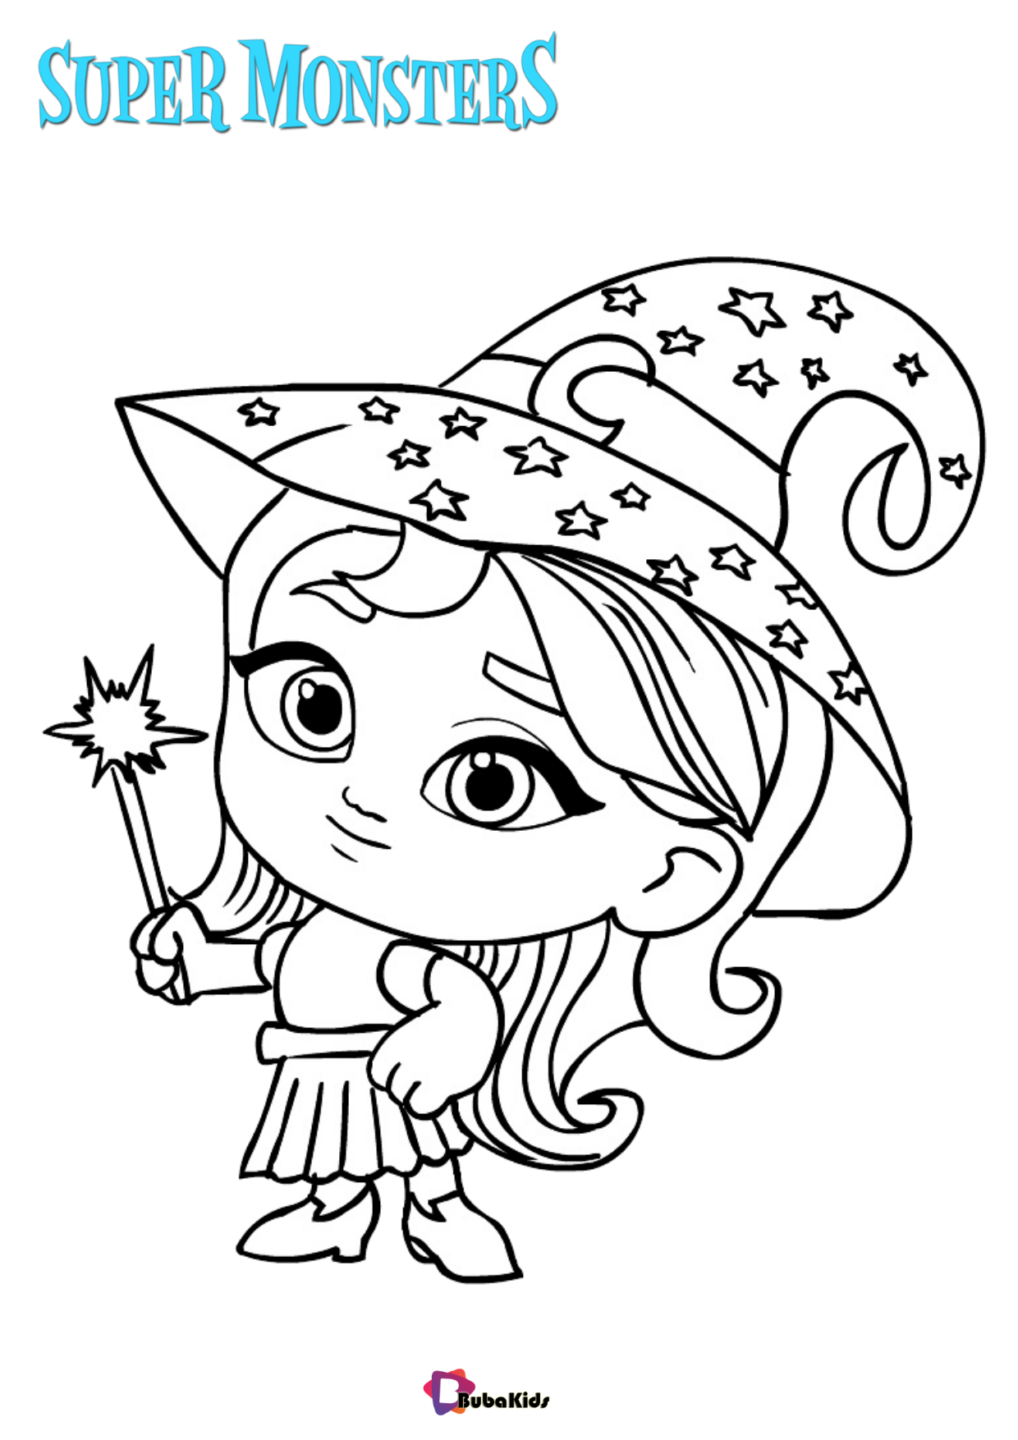 Katya Spelling Super Monsters coloring pages